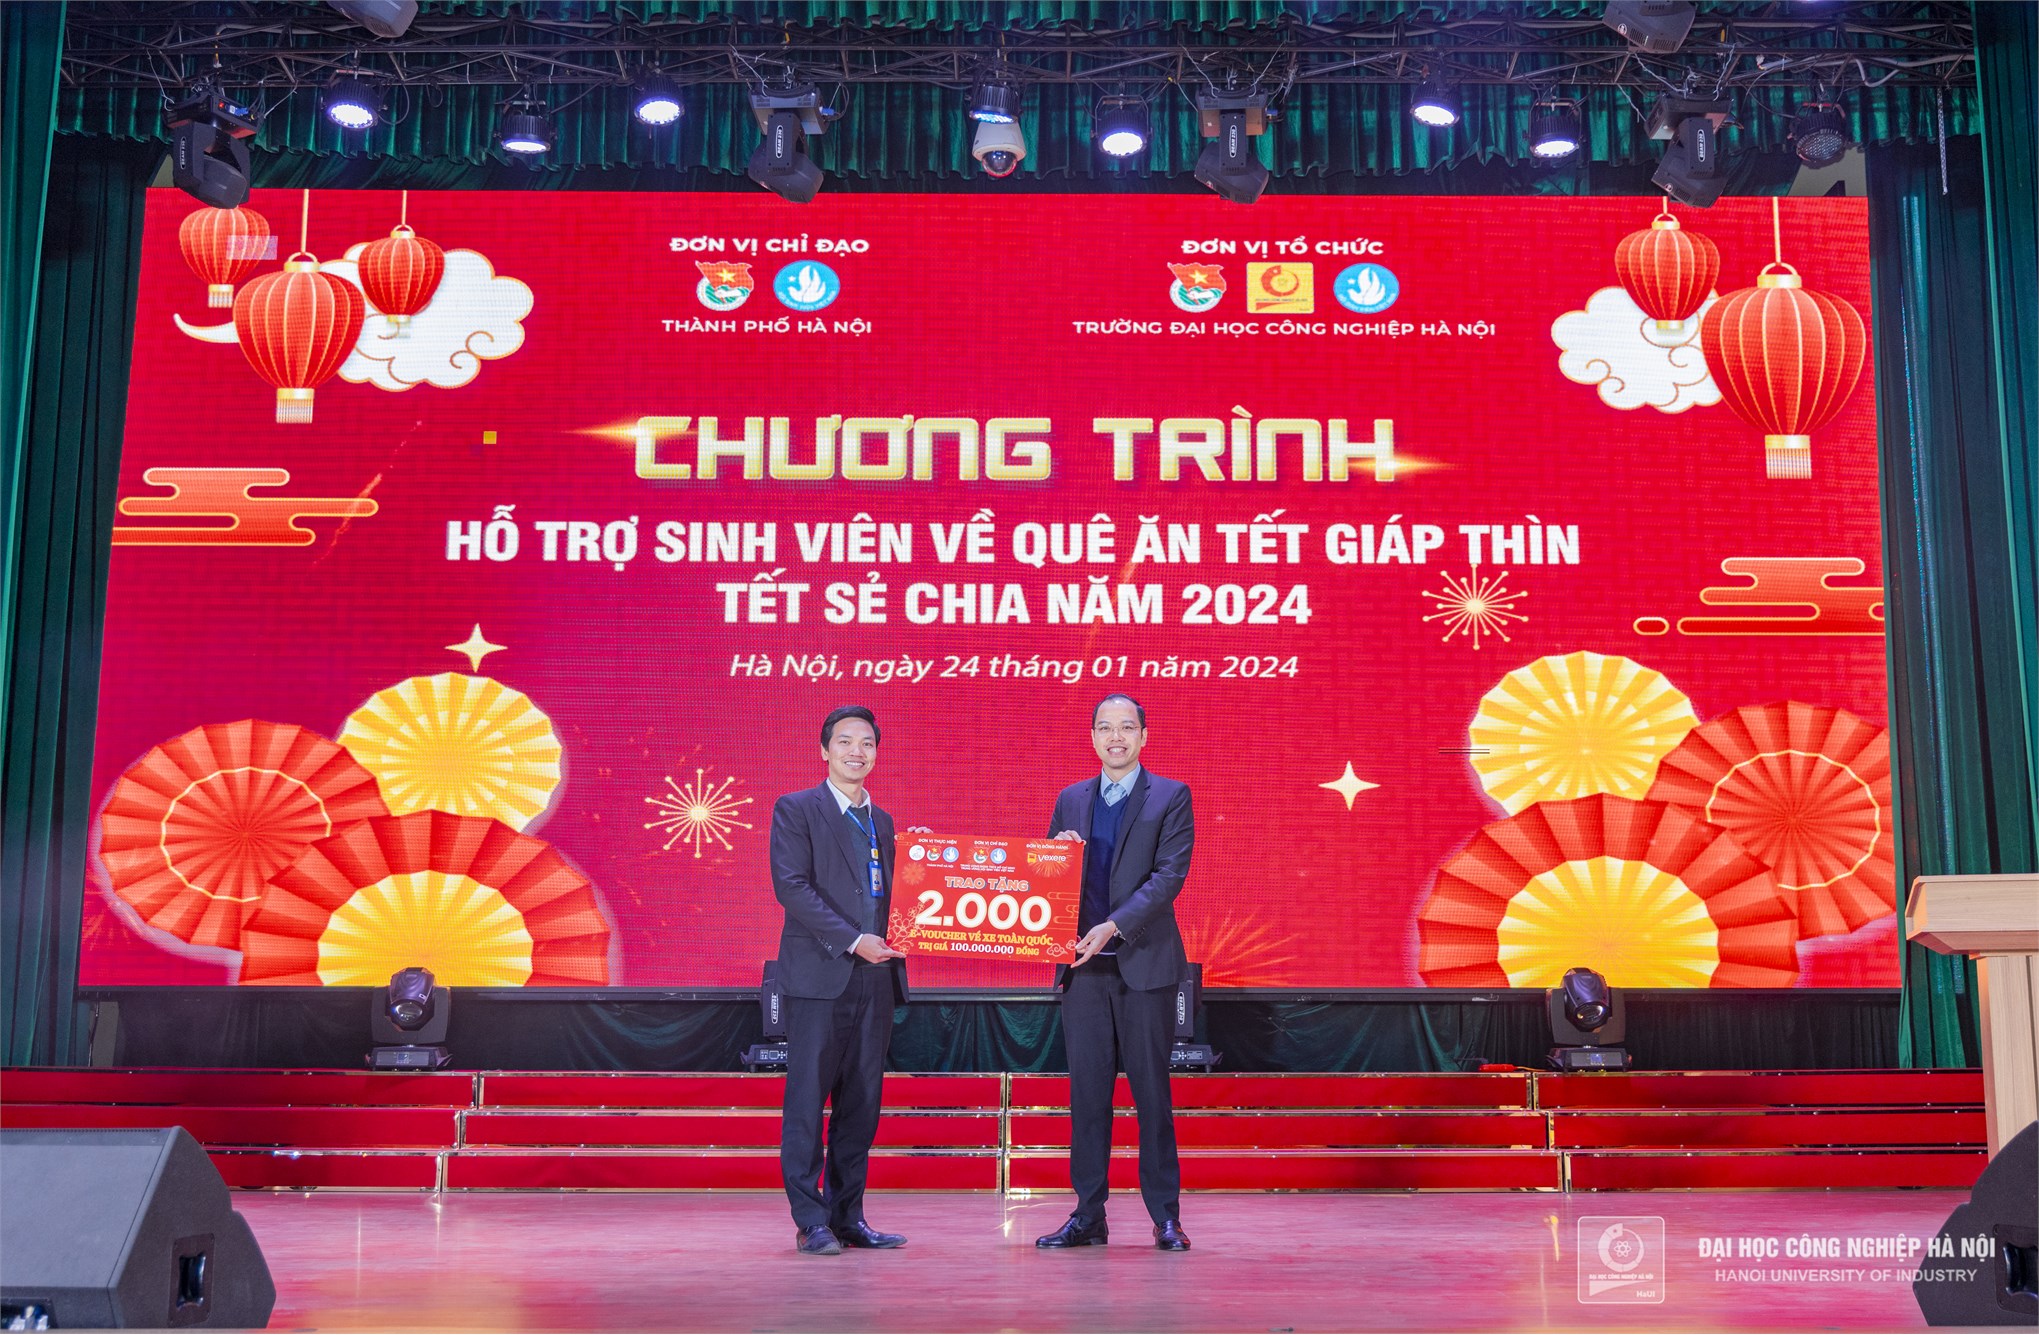 Spring Reunion - Tet Sharing: Igniting the Flame of Love at Hanoi University of Industry